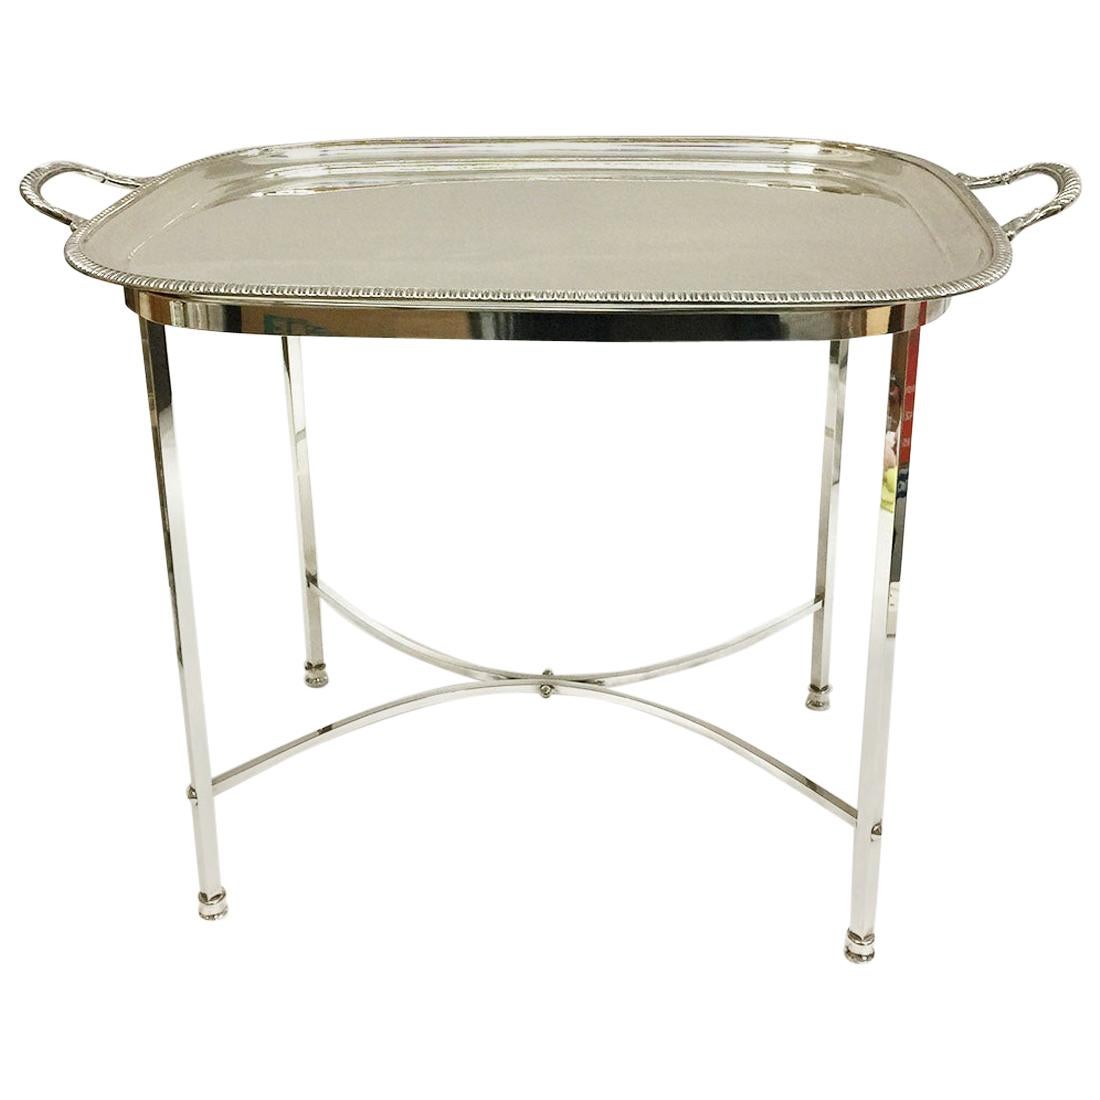 Harrison Brothers & Howson English Silver-Plated Tea Table